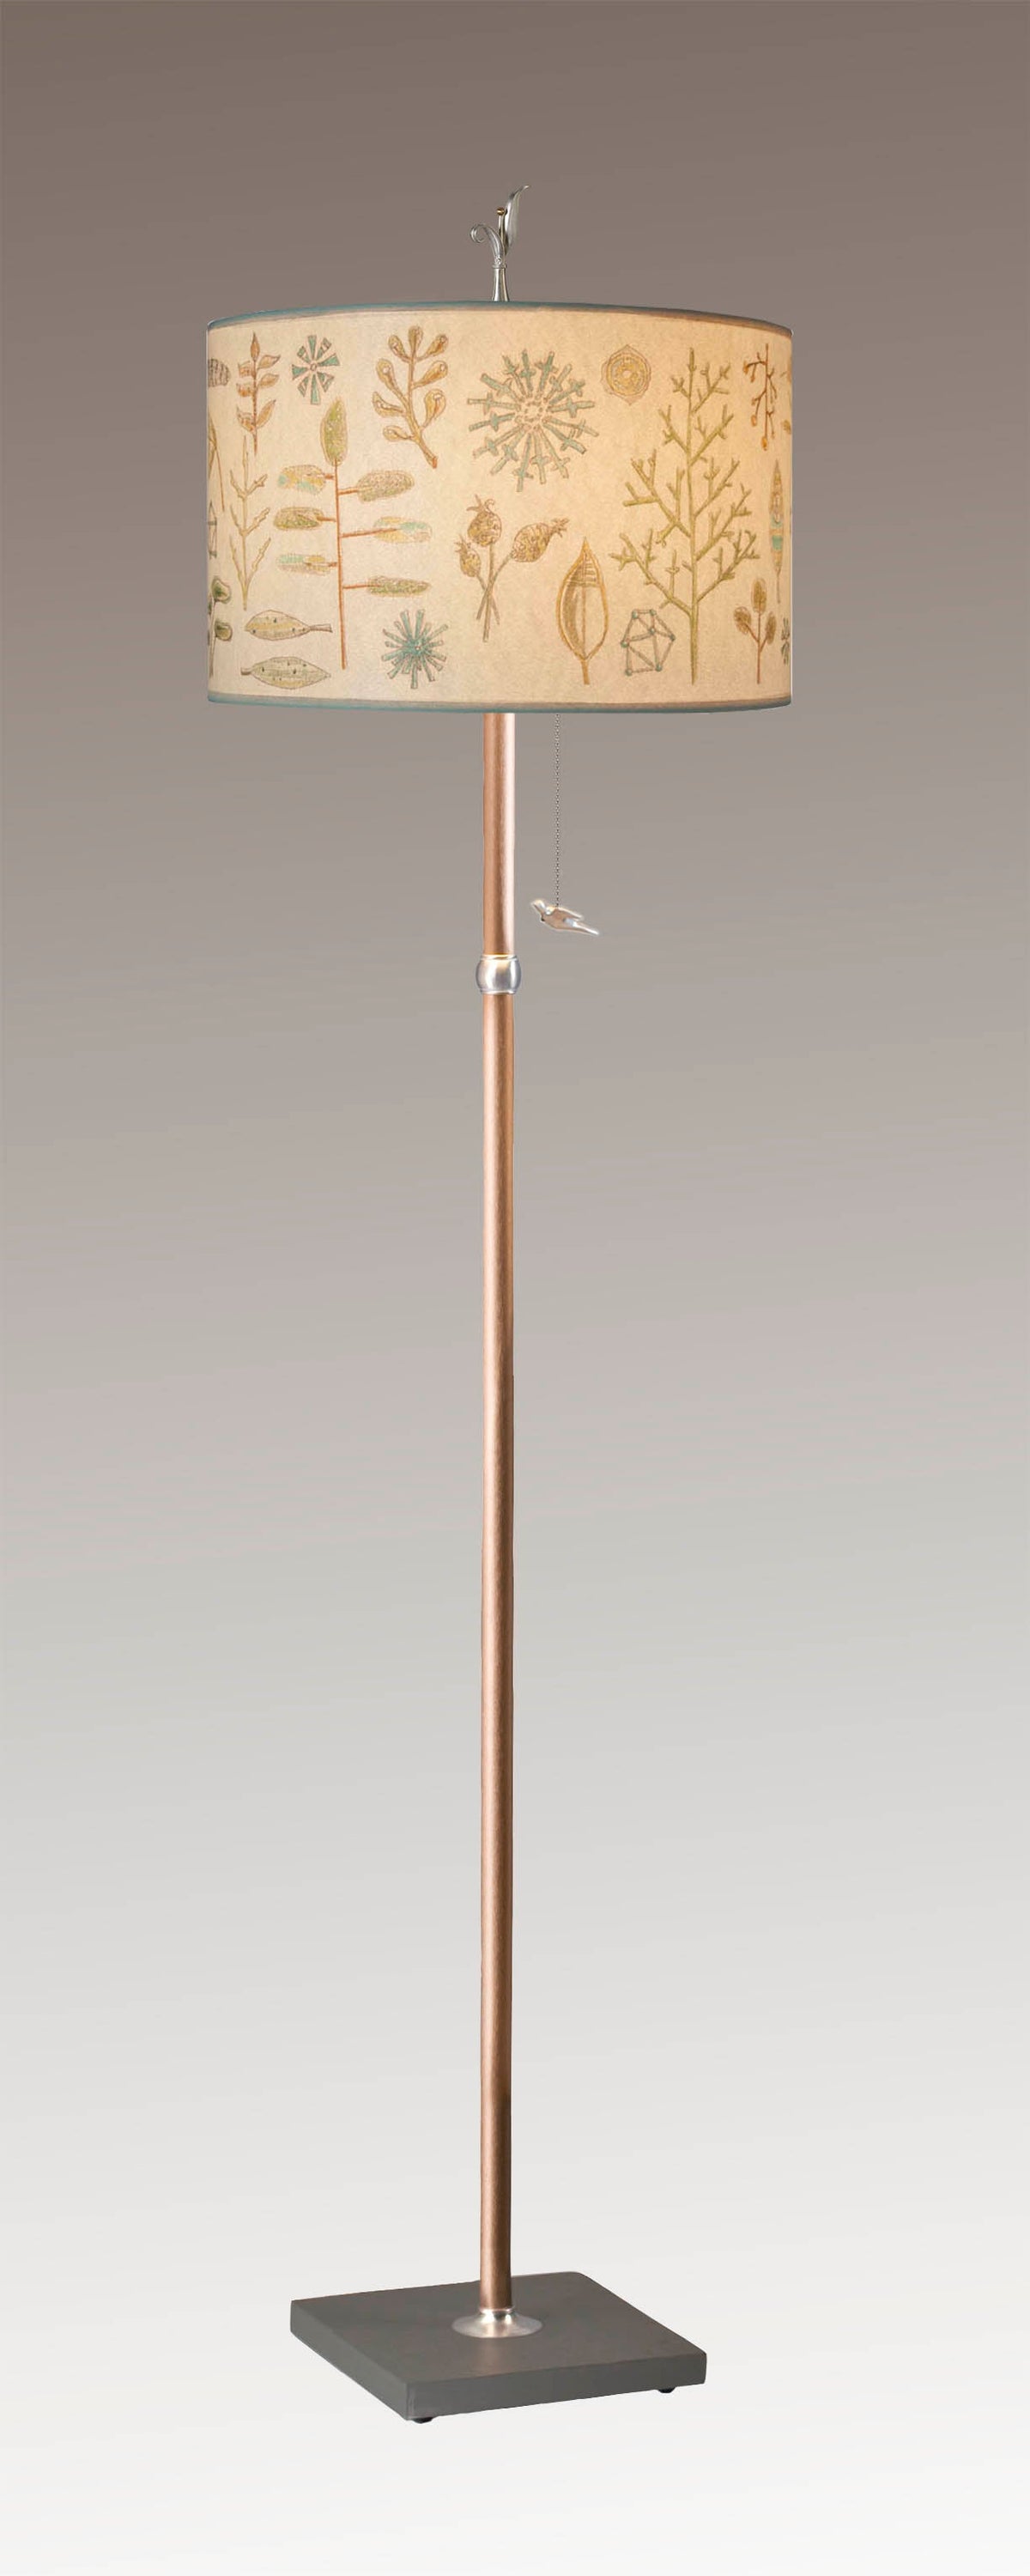 Janna Ugone &amp; Co Floor Lamp Copper Floor Lamp with Large Drum Shade in Field Chart